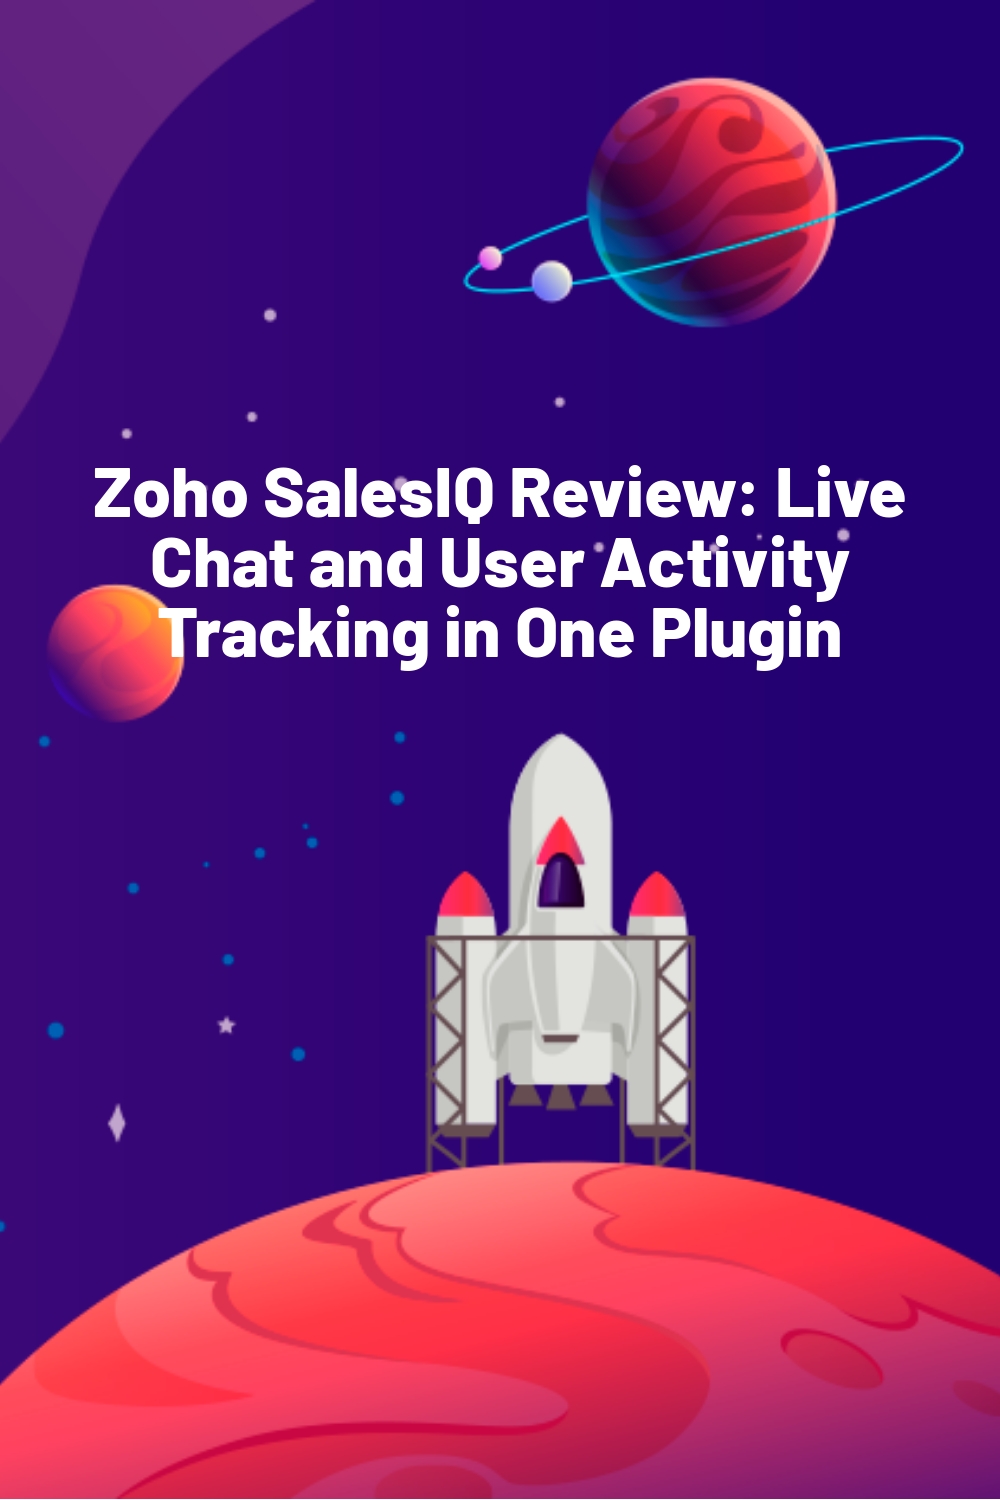 Zoho SalesIQ Review: Live Chat and User Activity Tracking in One Plugin